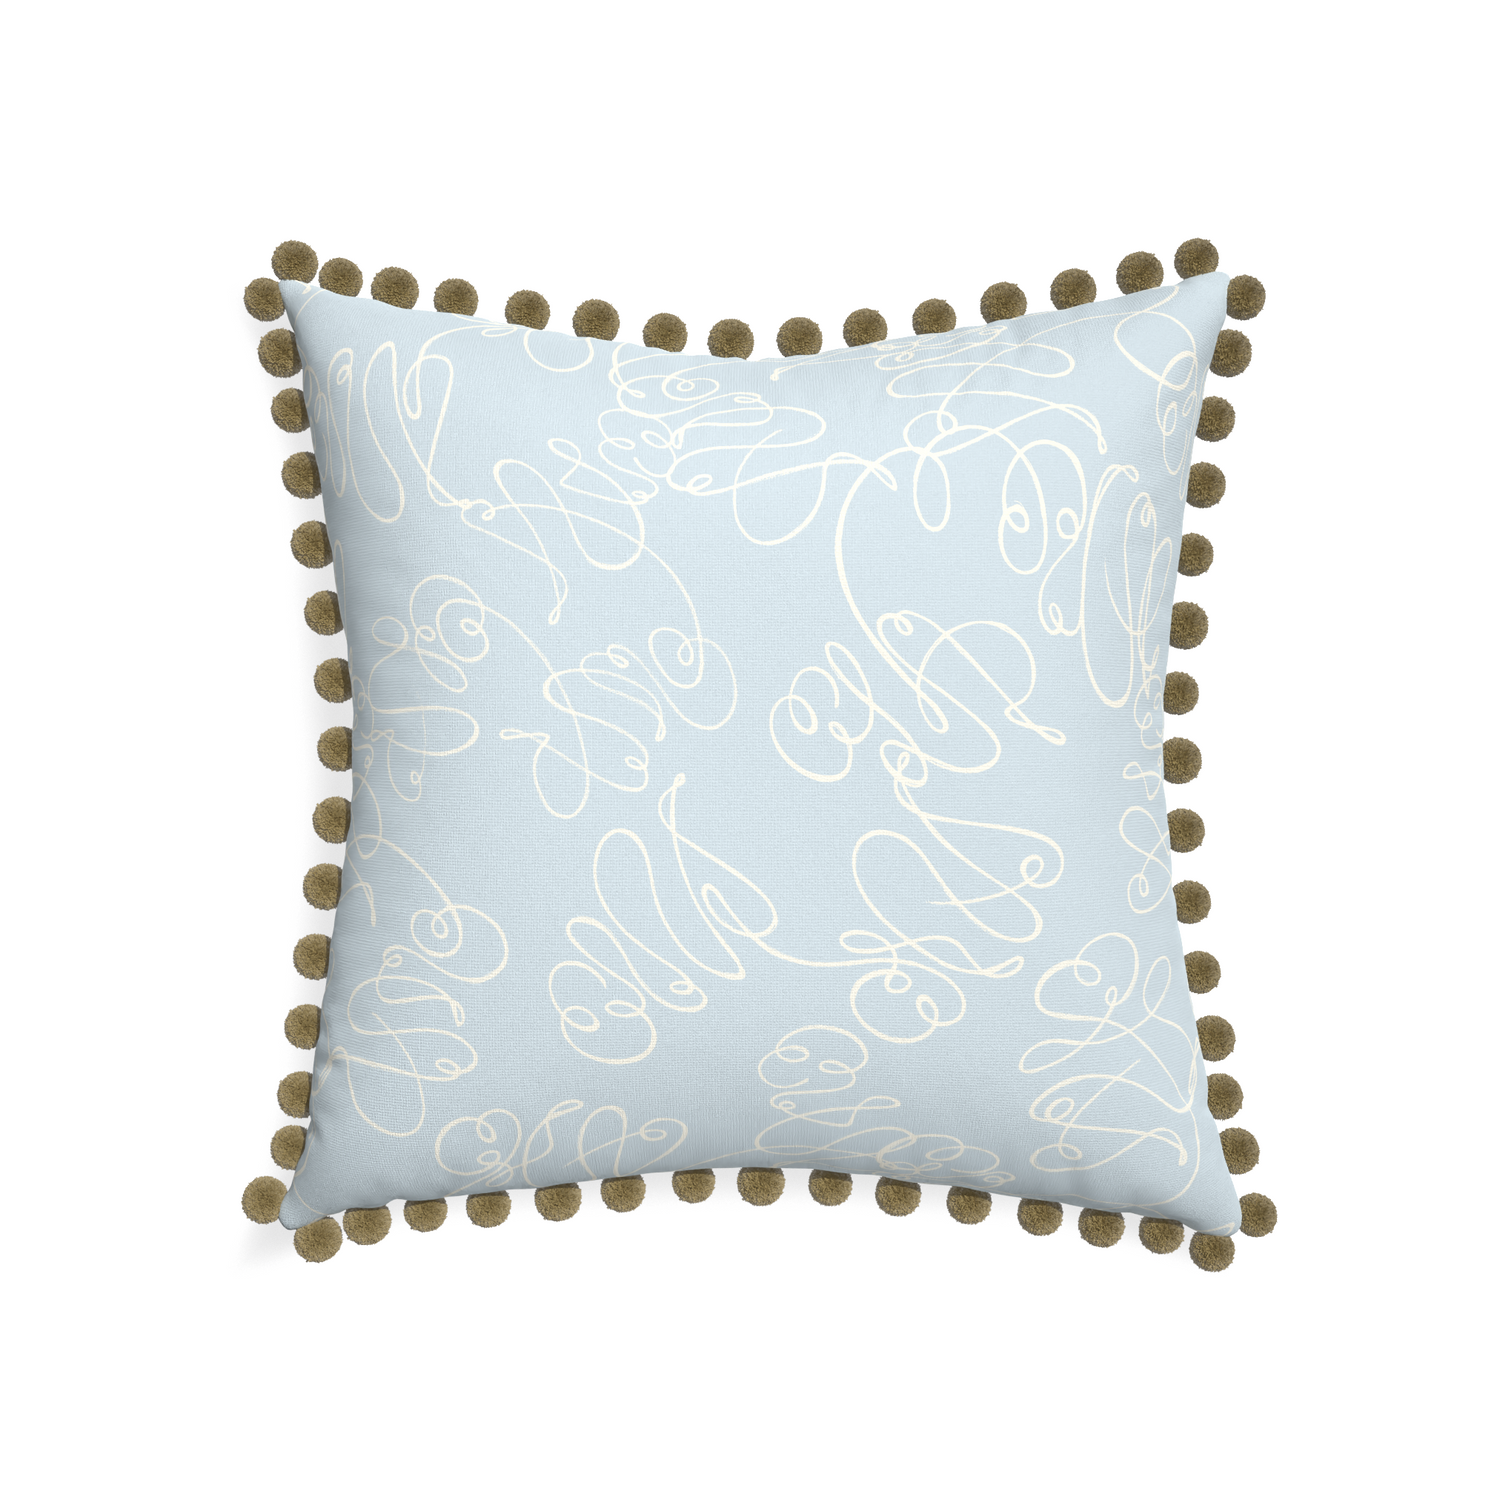 22-square mirabella custom pillow with olive pom pom on white background